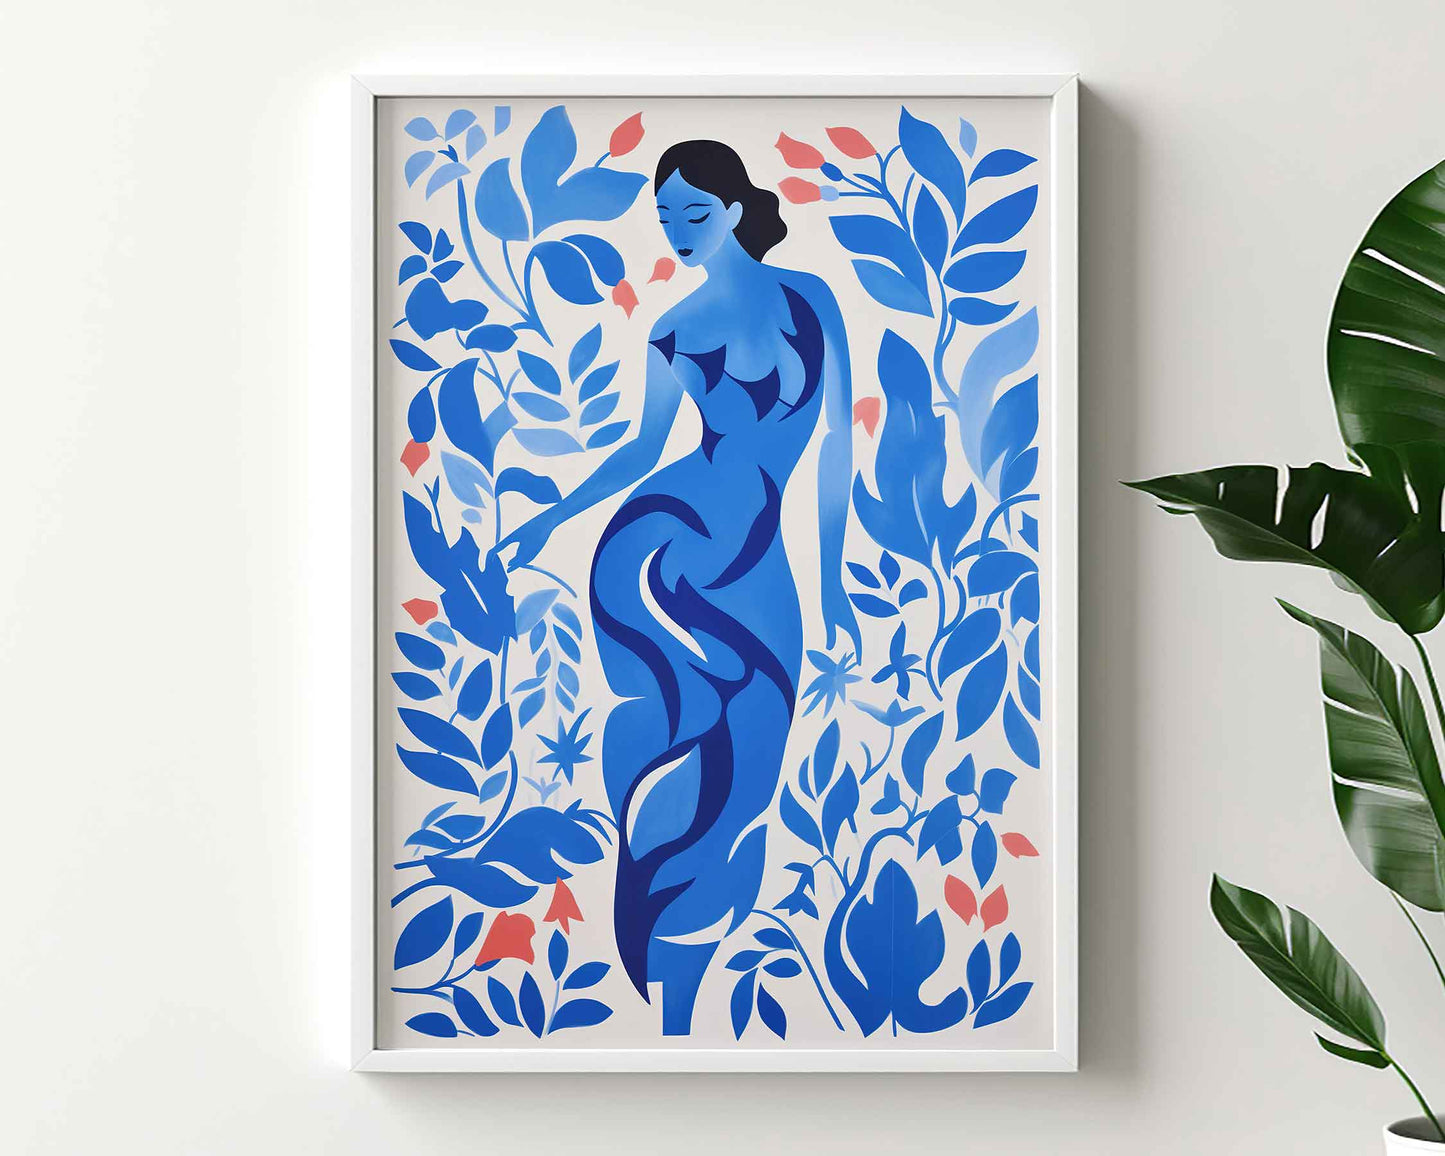 Framed Image of Matisse Wall Poster Style Print Blue Art Themed Oil Paintings